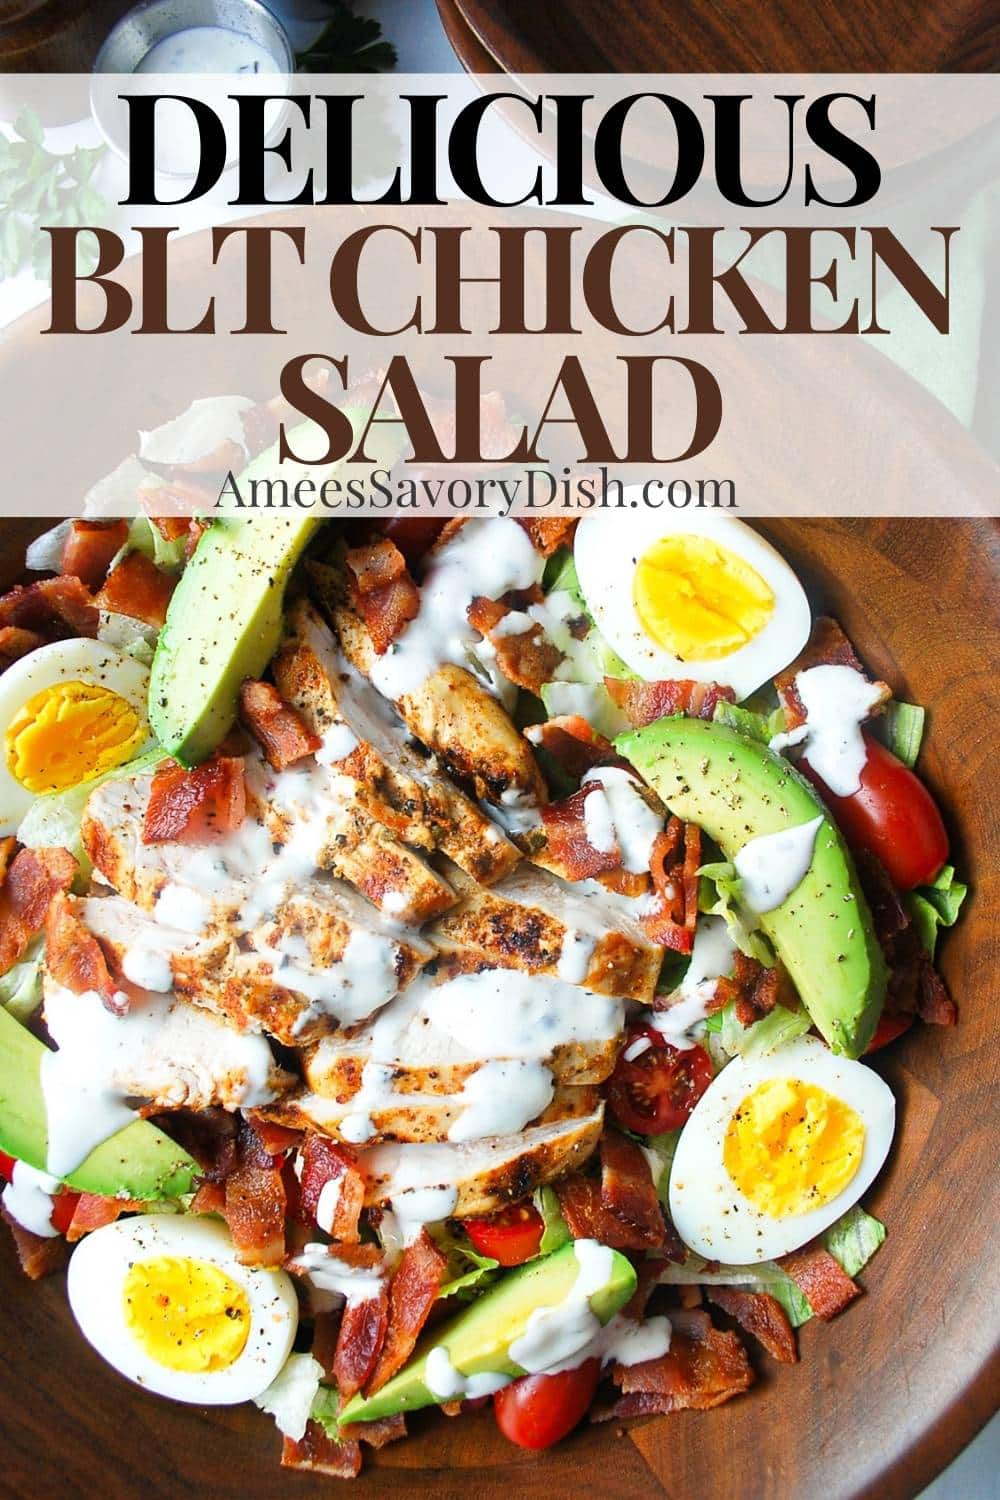 This BLT Chicken Salad captures the spirit of a classic BLT sandwich in a super satisfying and downright delicious healthy salad bowl. via @Ameessavorydish